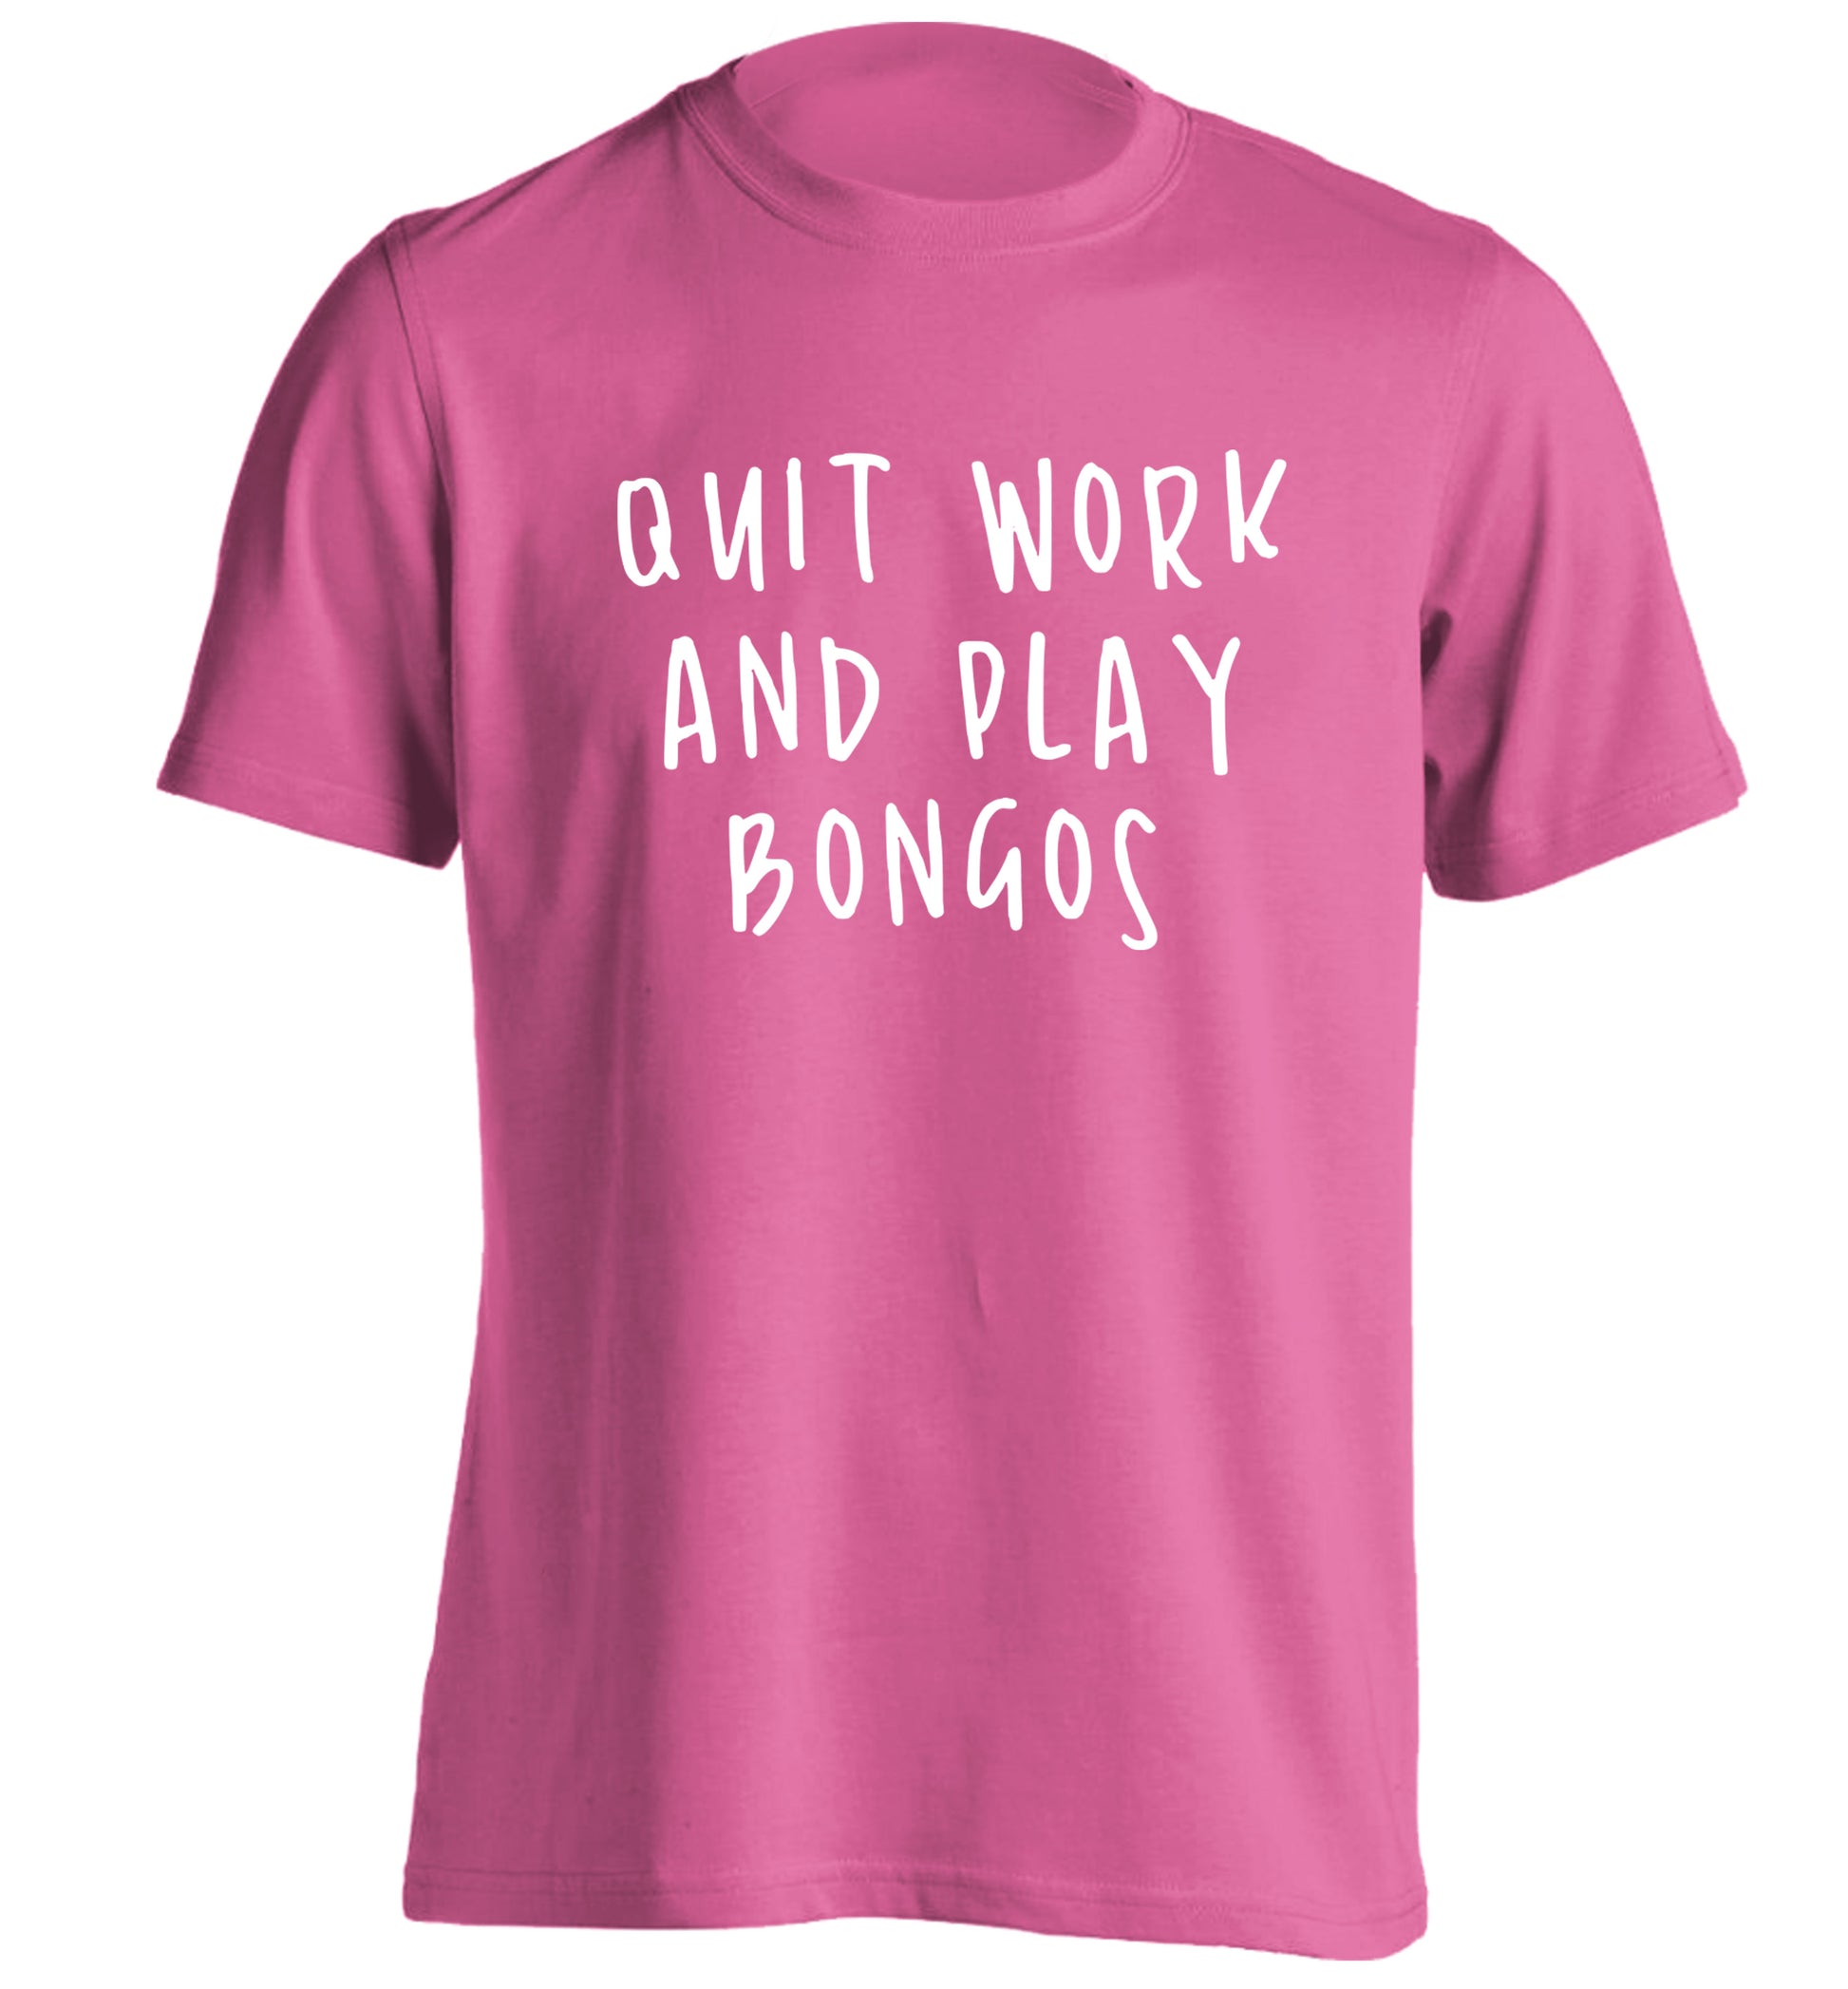 Quit work and play bongos adults unisex pink Tshirt 2XL